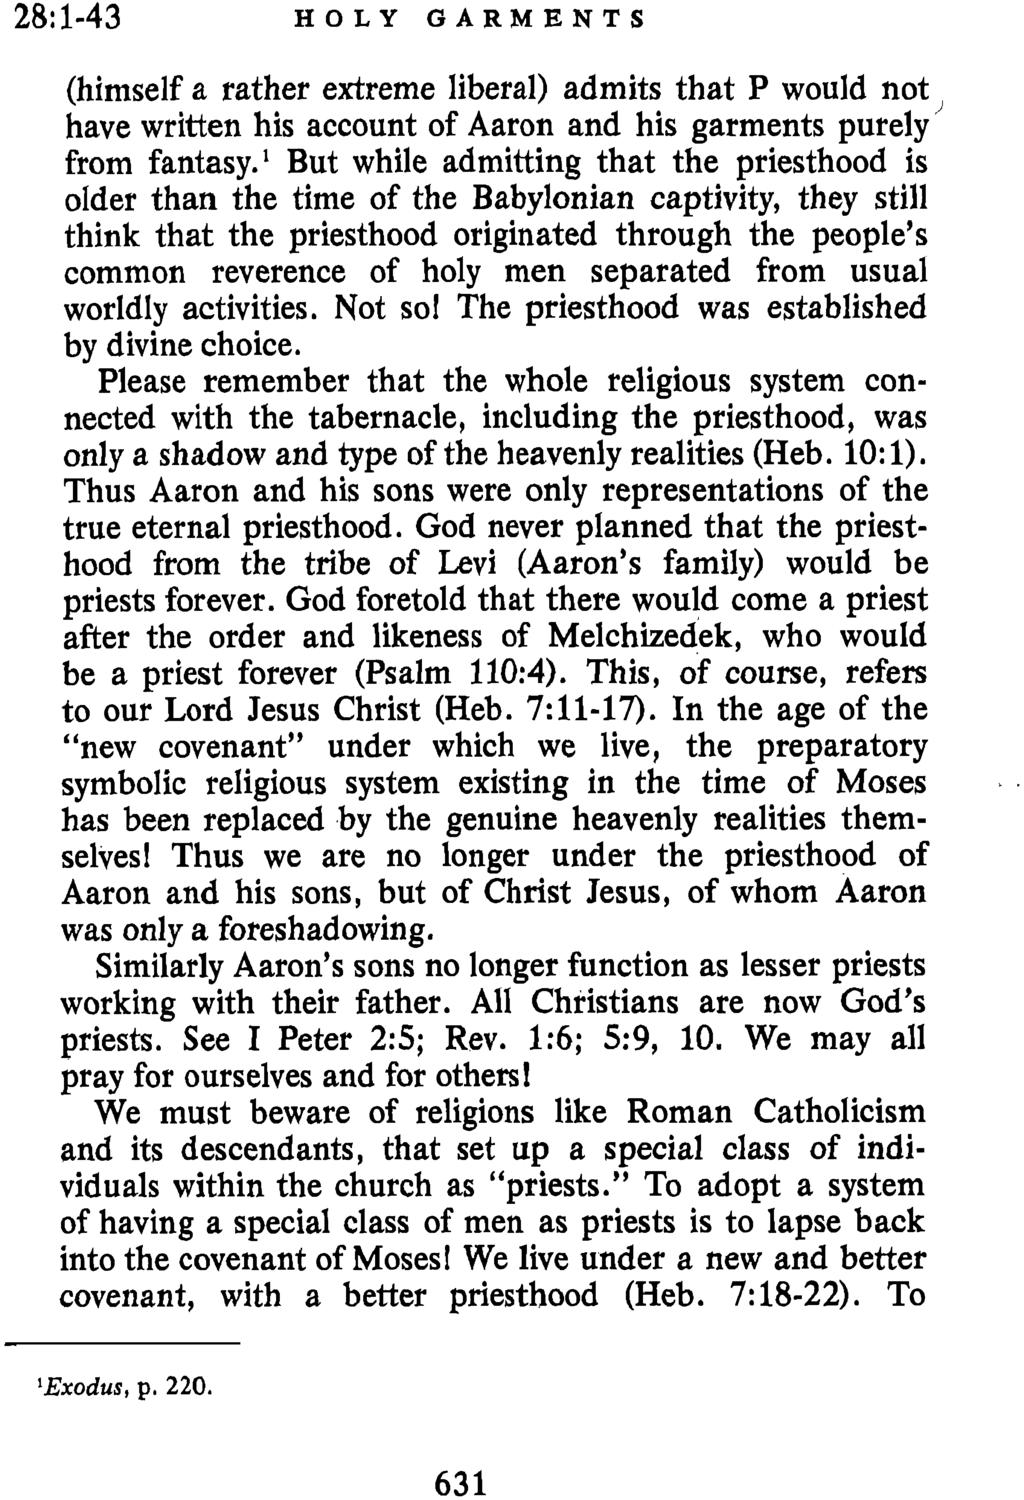 28: 1-43 HOLY GARMENTS (himself a rather extreme liberal) admits that P would not, have written his account of Aaron and his garments purely from fantasy.